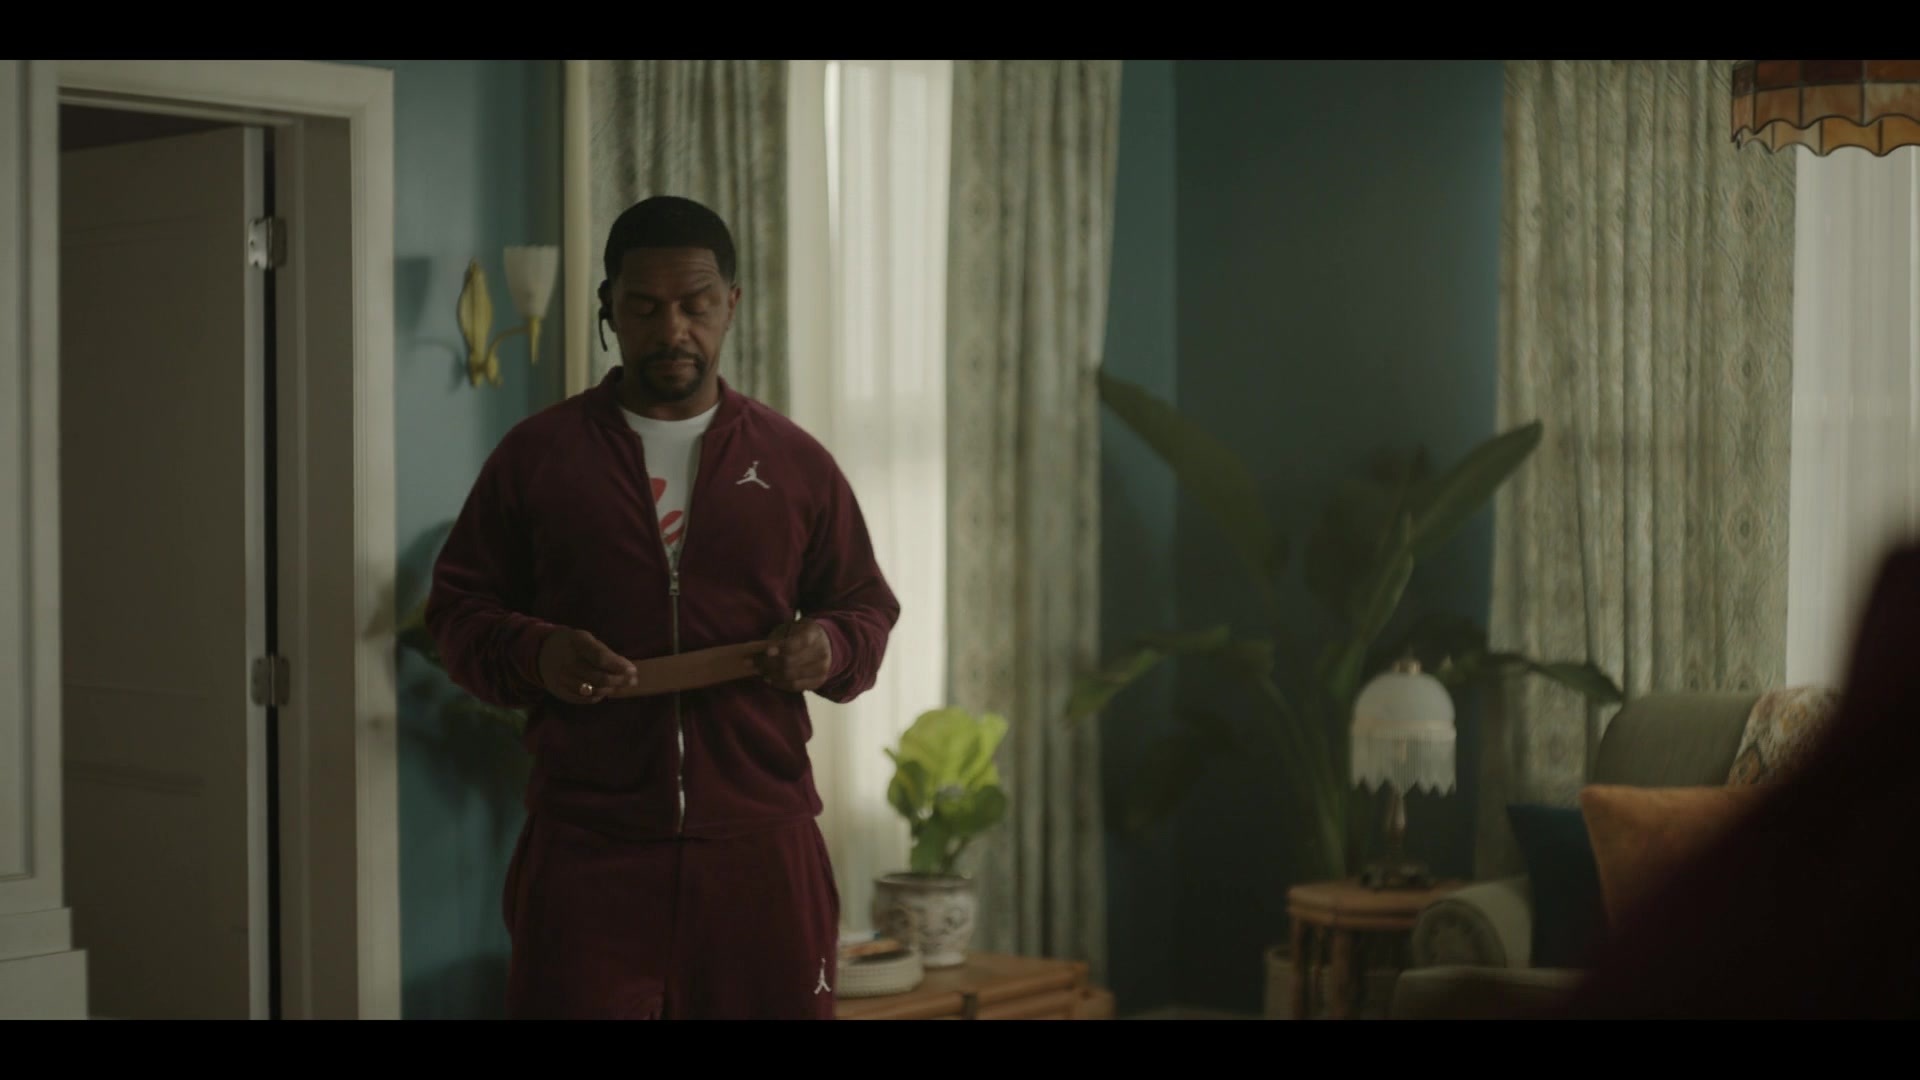 Nike Jordan Velour Tracksuit The Chi S05E09 "I'm Looking For A New Thing" (2022)